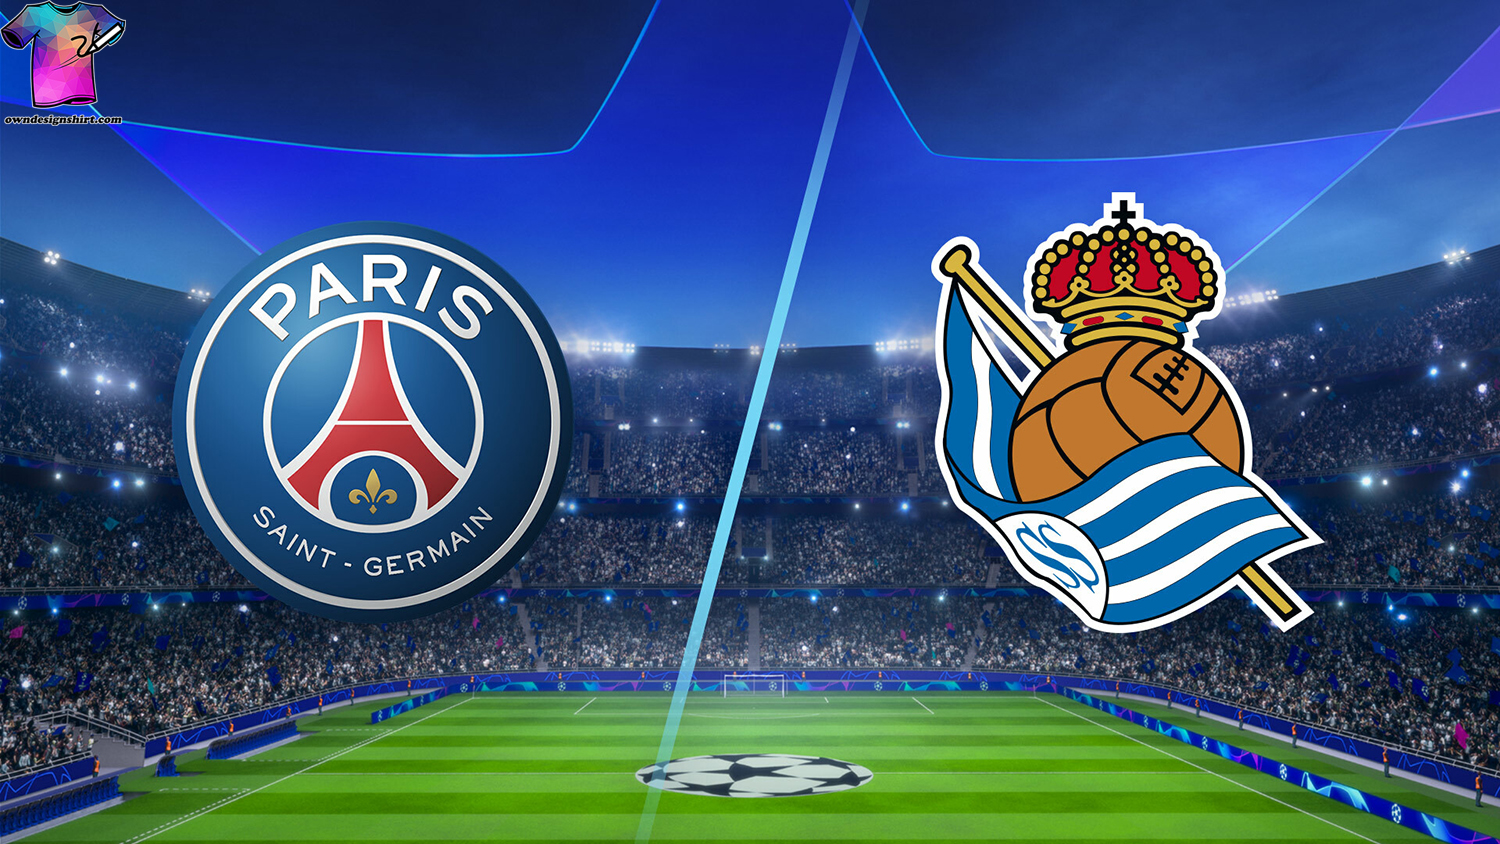 A Night of Dreams PSG and Real Sociedad's Champions League Epic